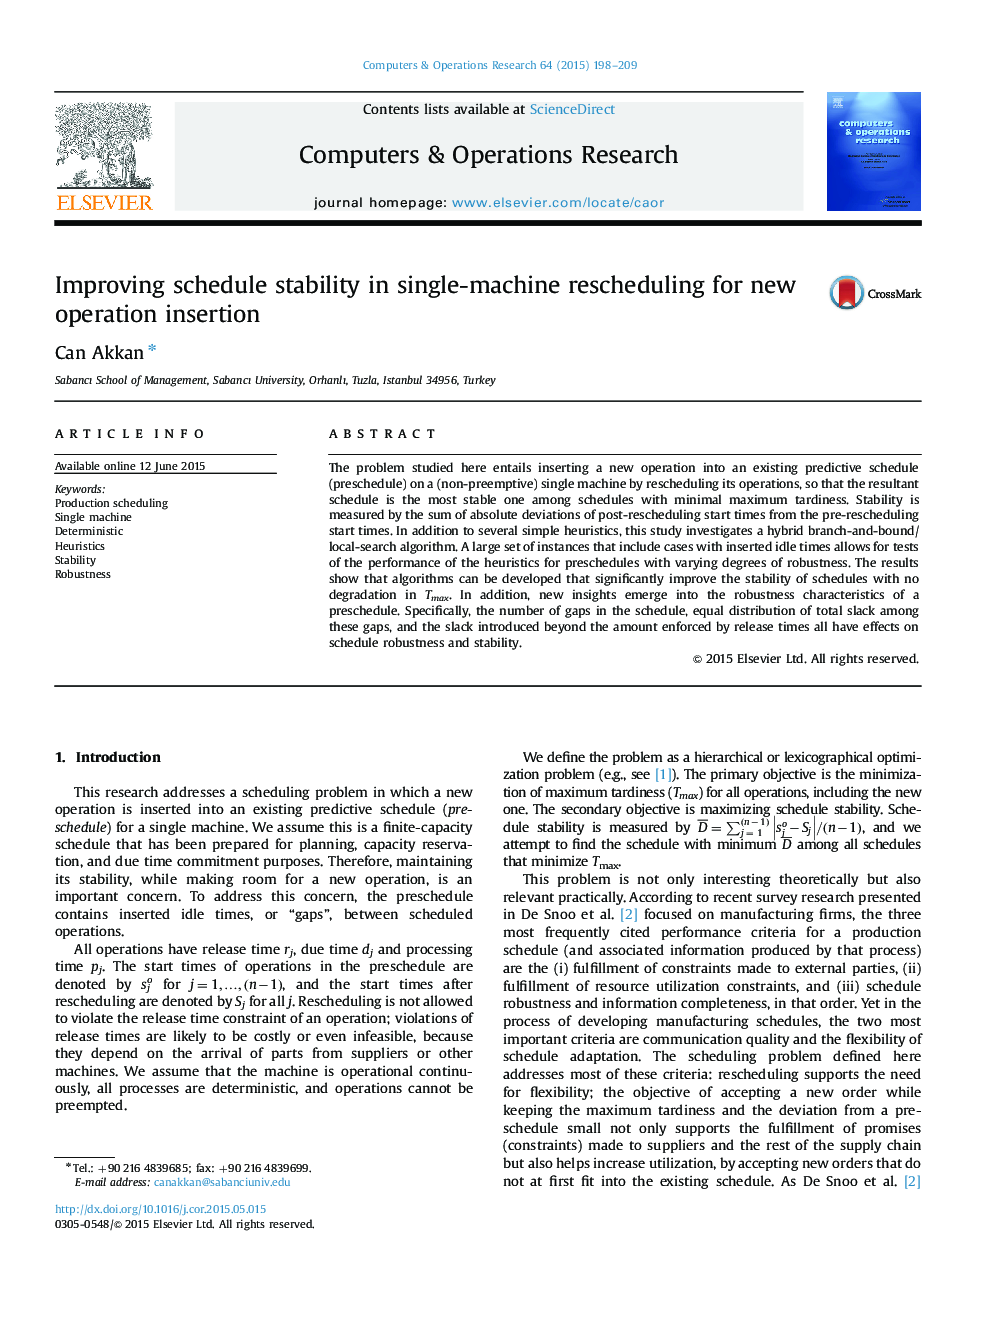 Improving schedule stability in single-machine rescheduling for new operation insertion